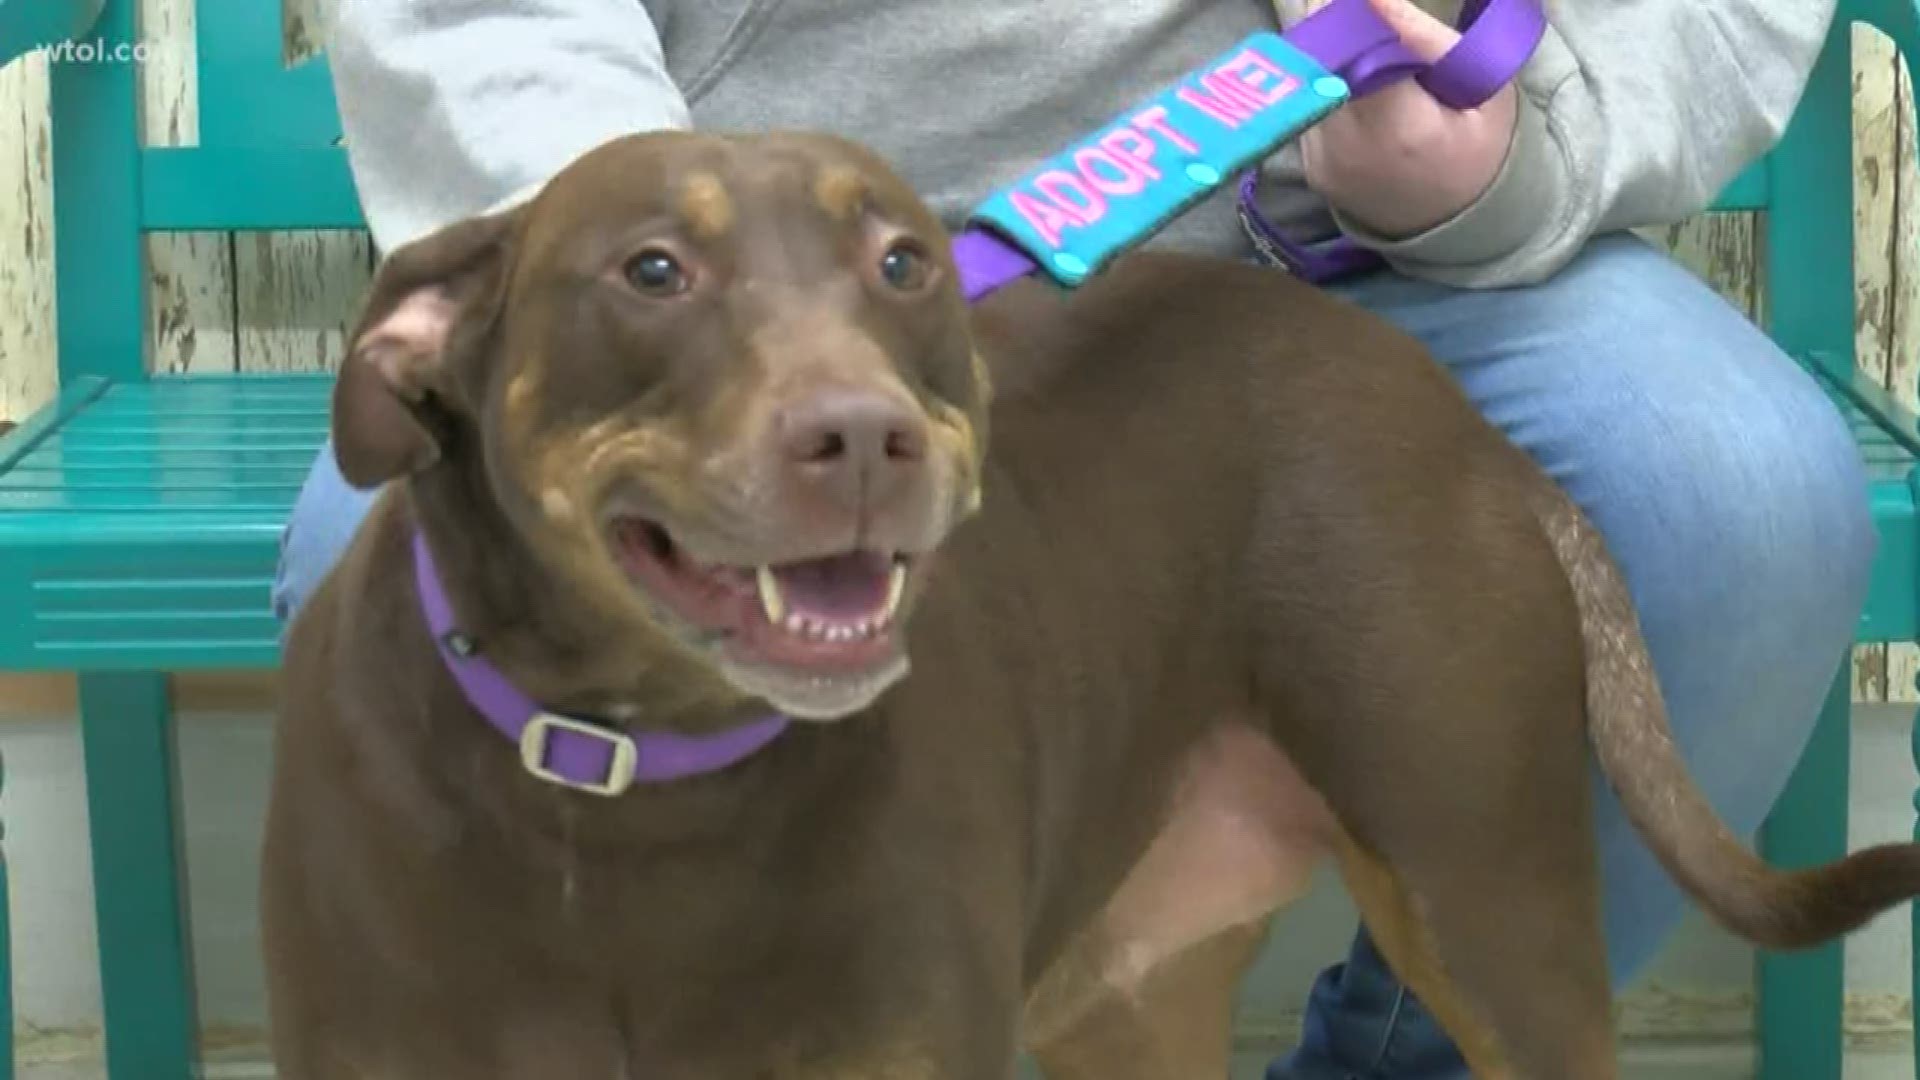 Volunteers are hoping to find her a home before the end of the week and clear the shelter.